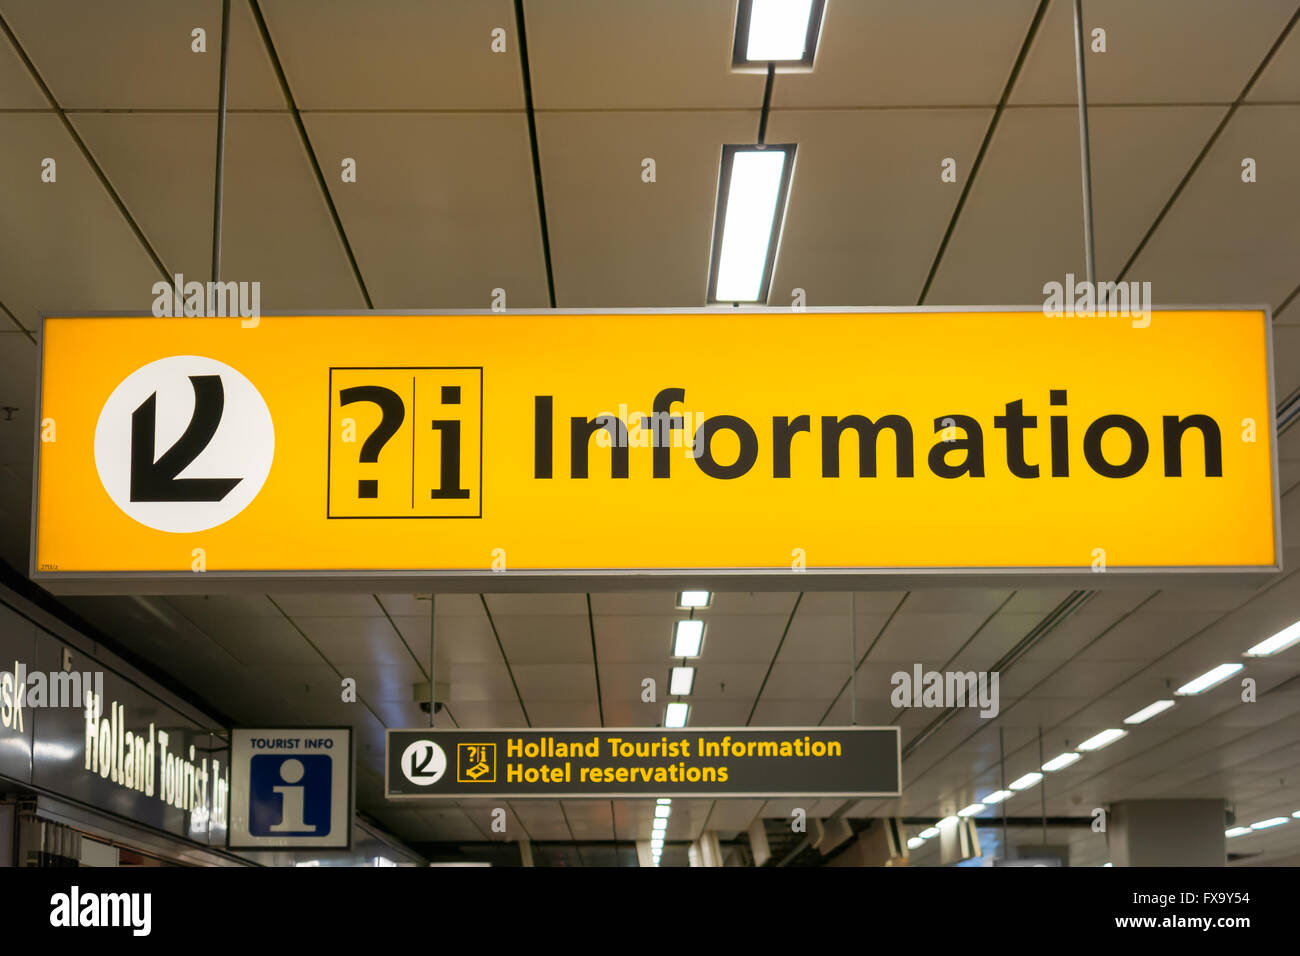 Information and tourism signs in arrivals terminal of Schiphol Amsterdam Airport, Netherlands Stock Photo